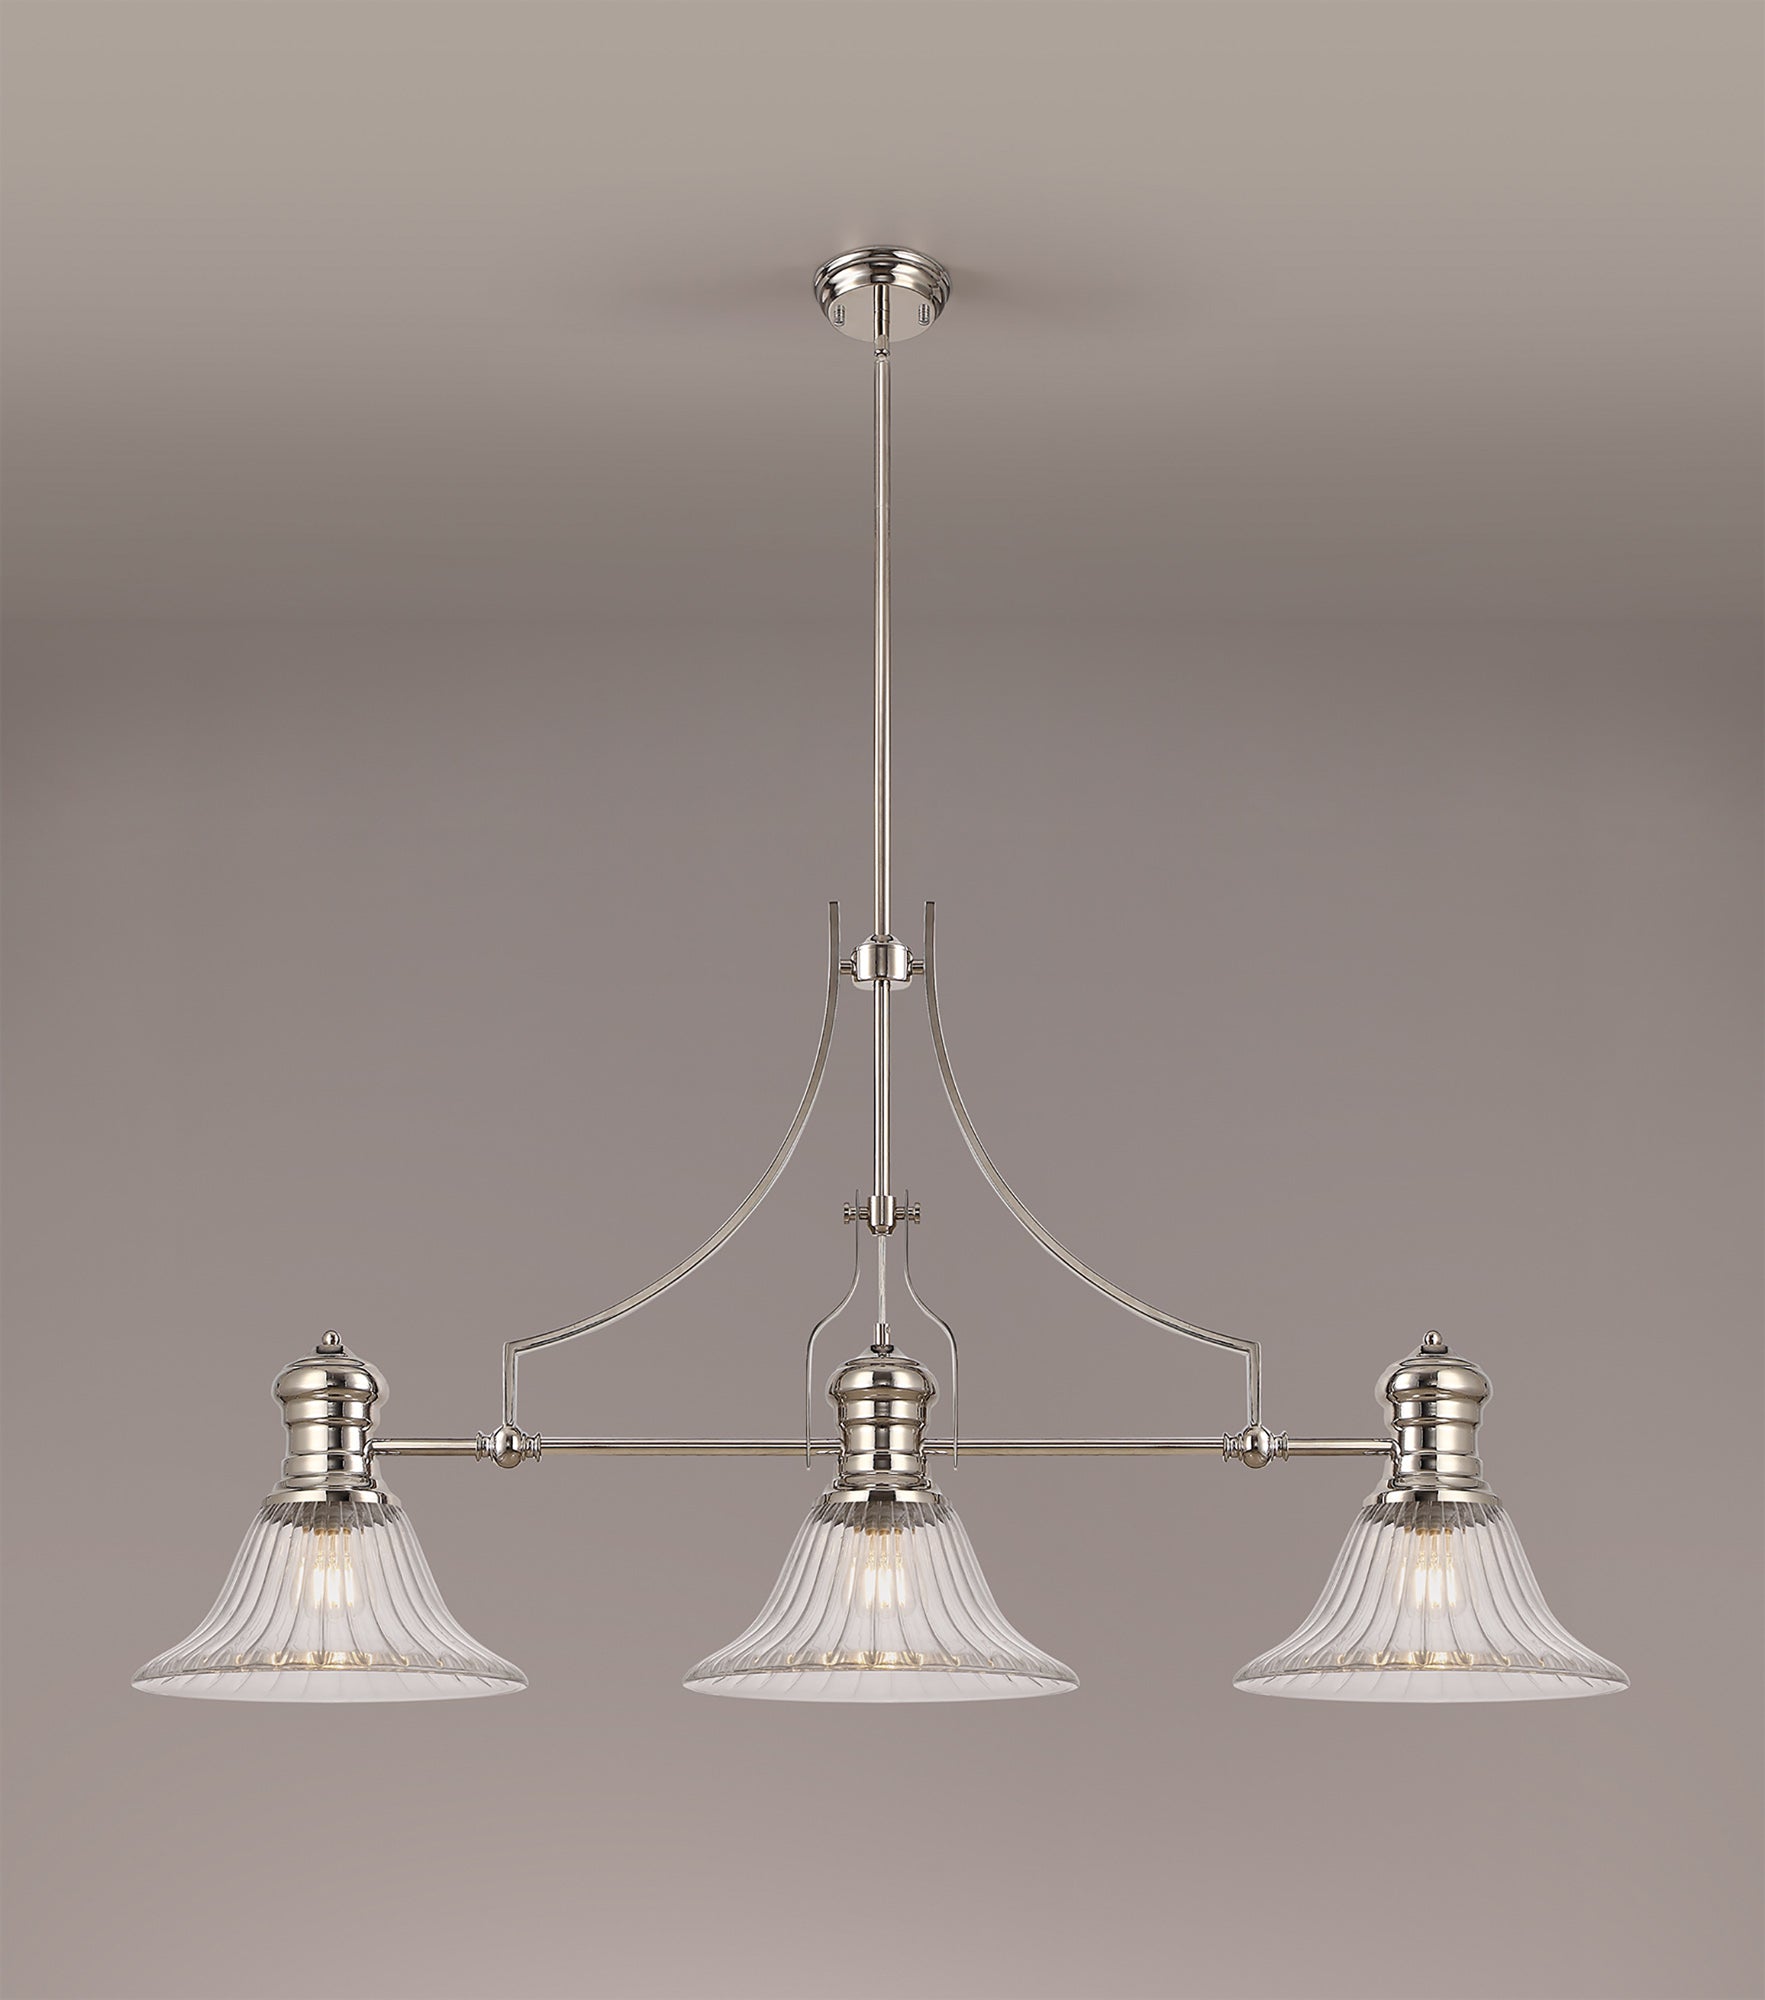 Docker 3 Light Linear Pendant E27 With 30cm Bell Glass Shade, Polished Nickel, Clear